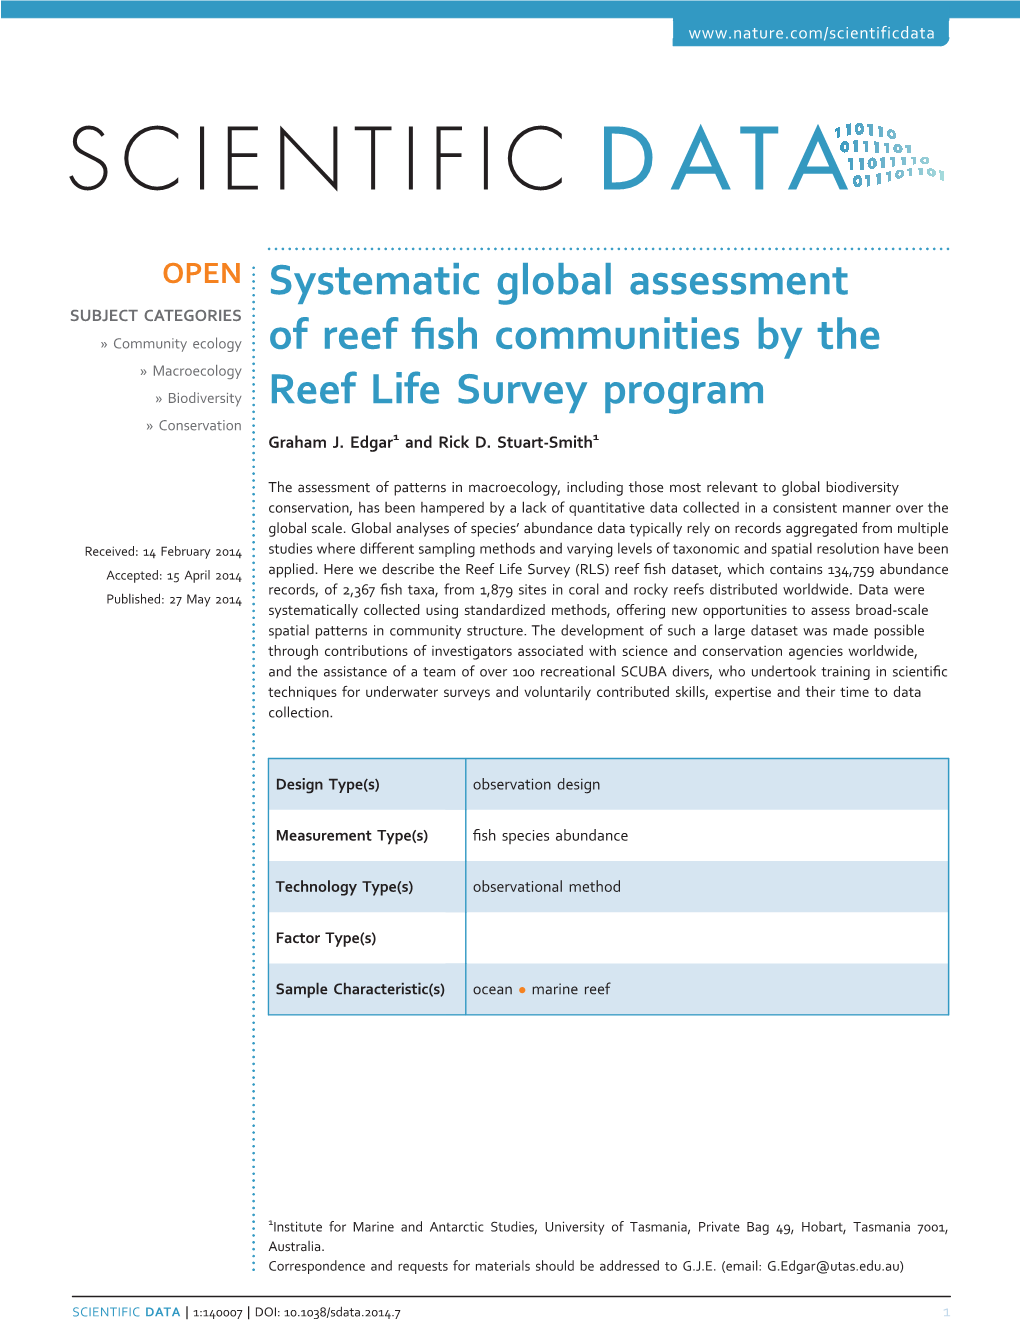 Systematic Global Assessment of Reef Fish Communities by the Reef Life